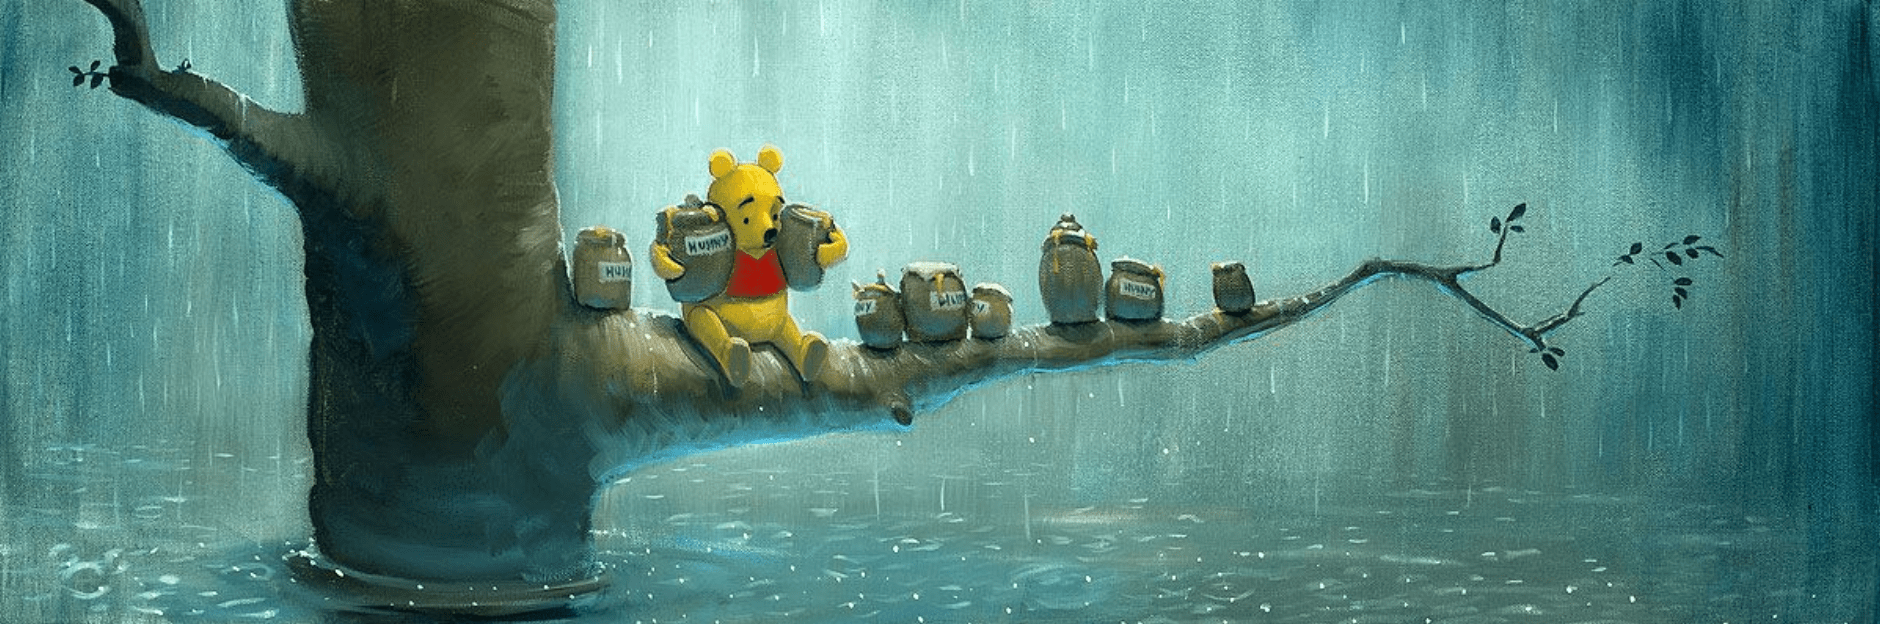 8X10 Winnie the Pooh canvas painting - Crazyheiferartwork - Paintings &  Prints, Abstract, Figurative - ArtPal